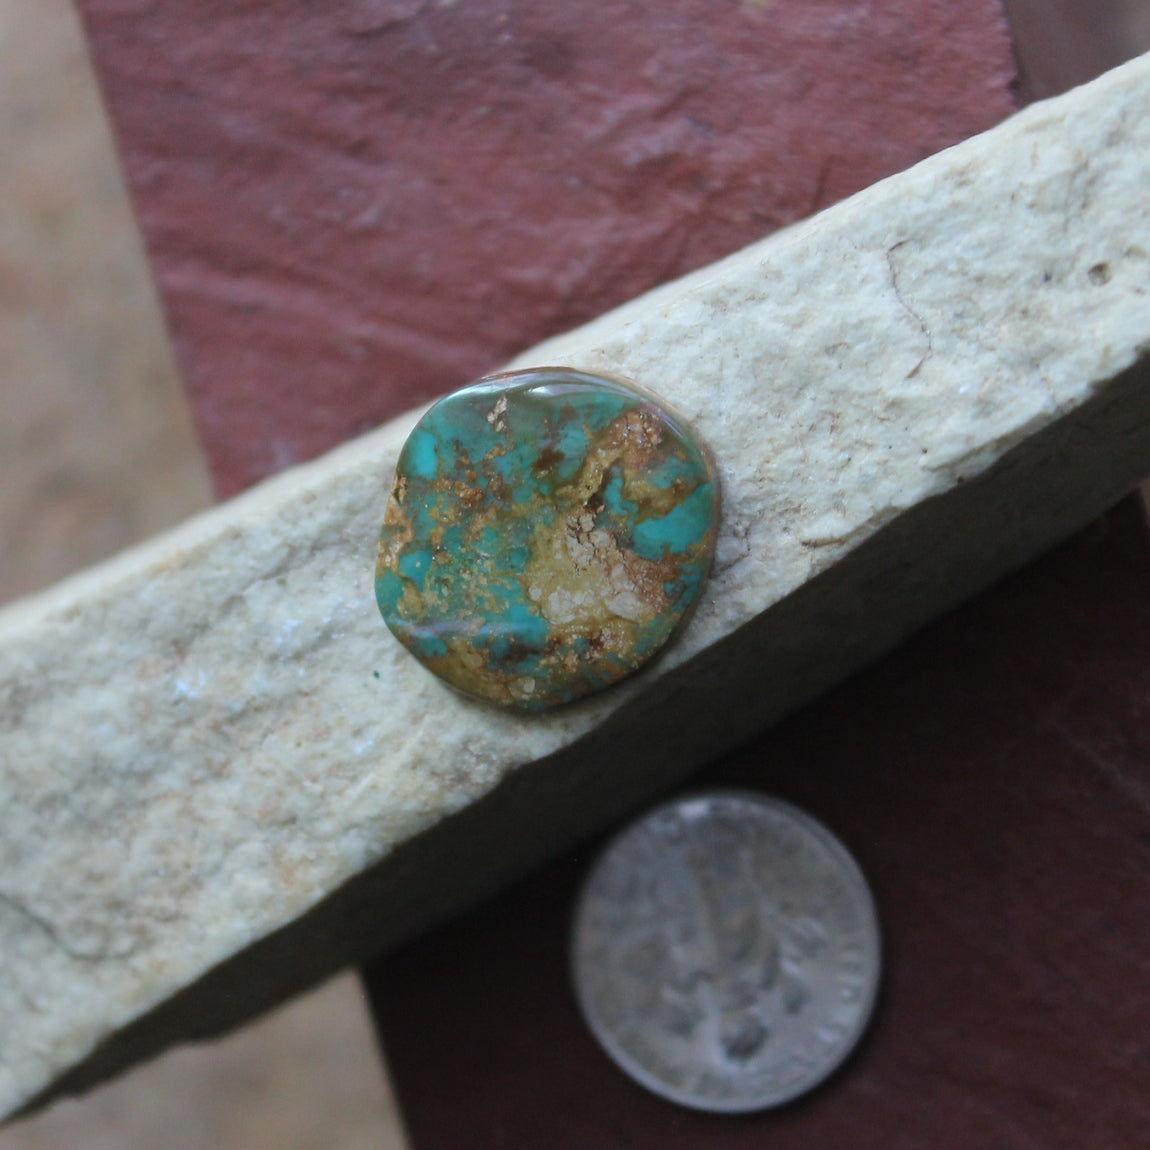 8 carat color blue Stone Mountain Turquoise cabochon with red matrix